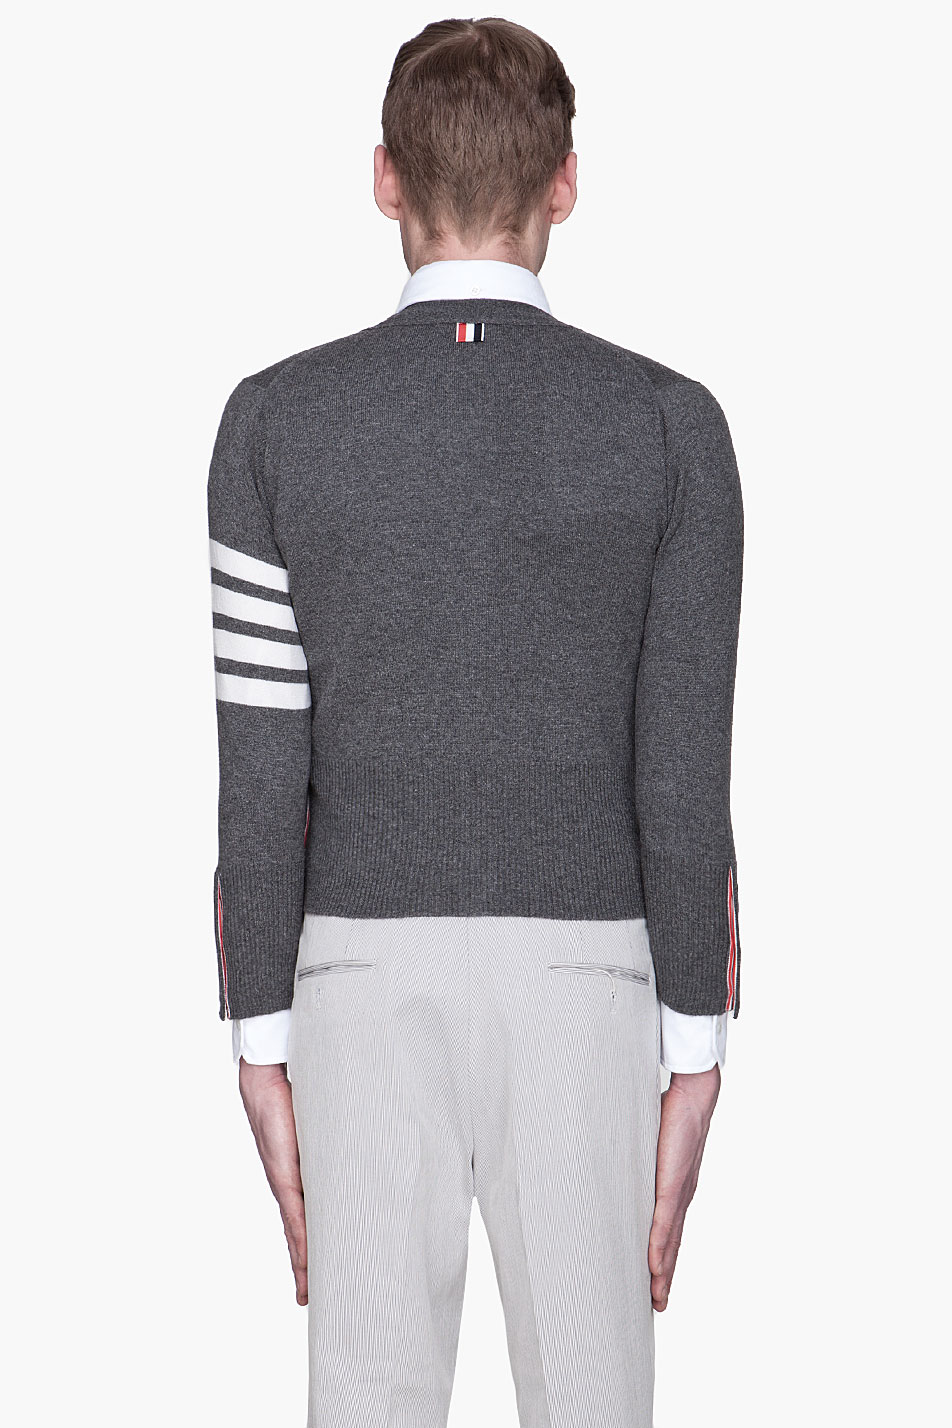 Thom browne Charcoal Grey Classic Cashmere Cardigan in Gray for Men | Lyst